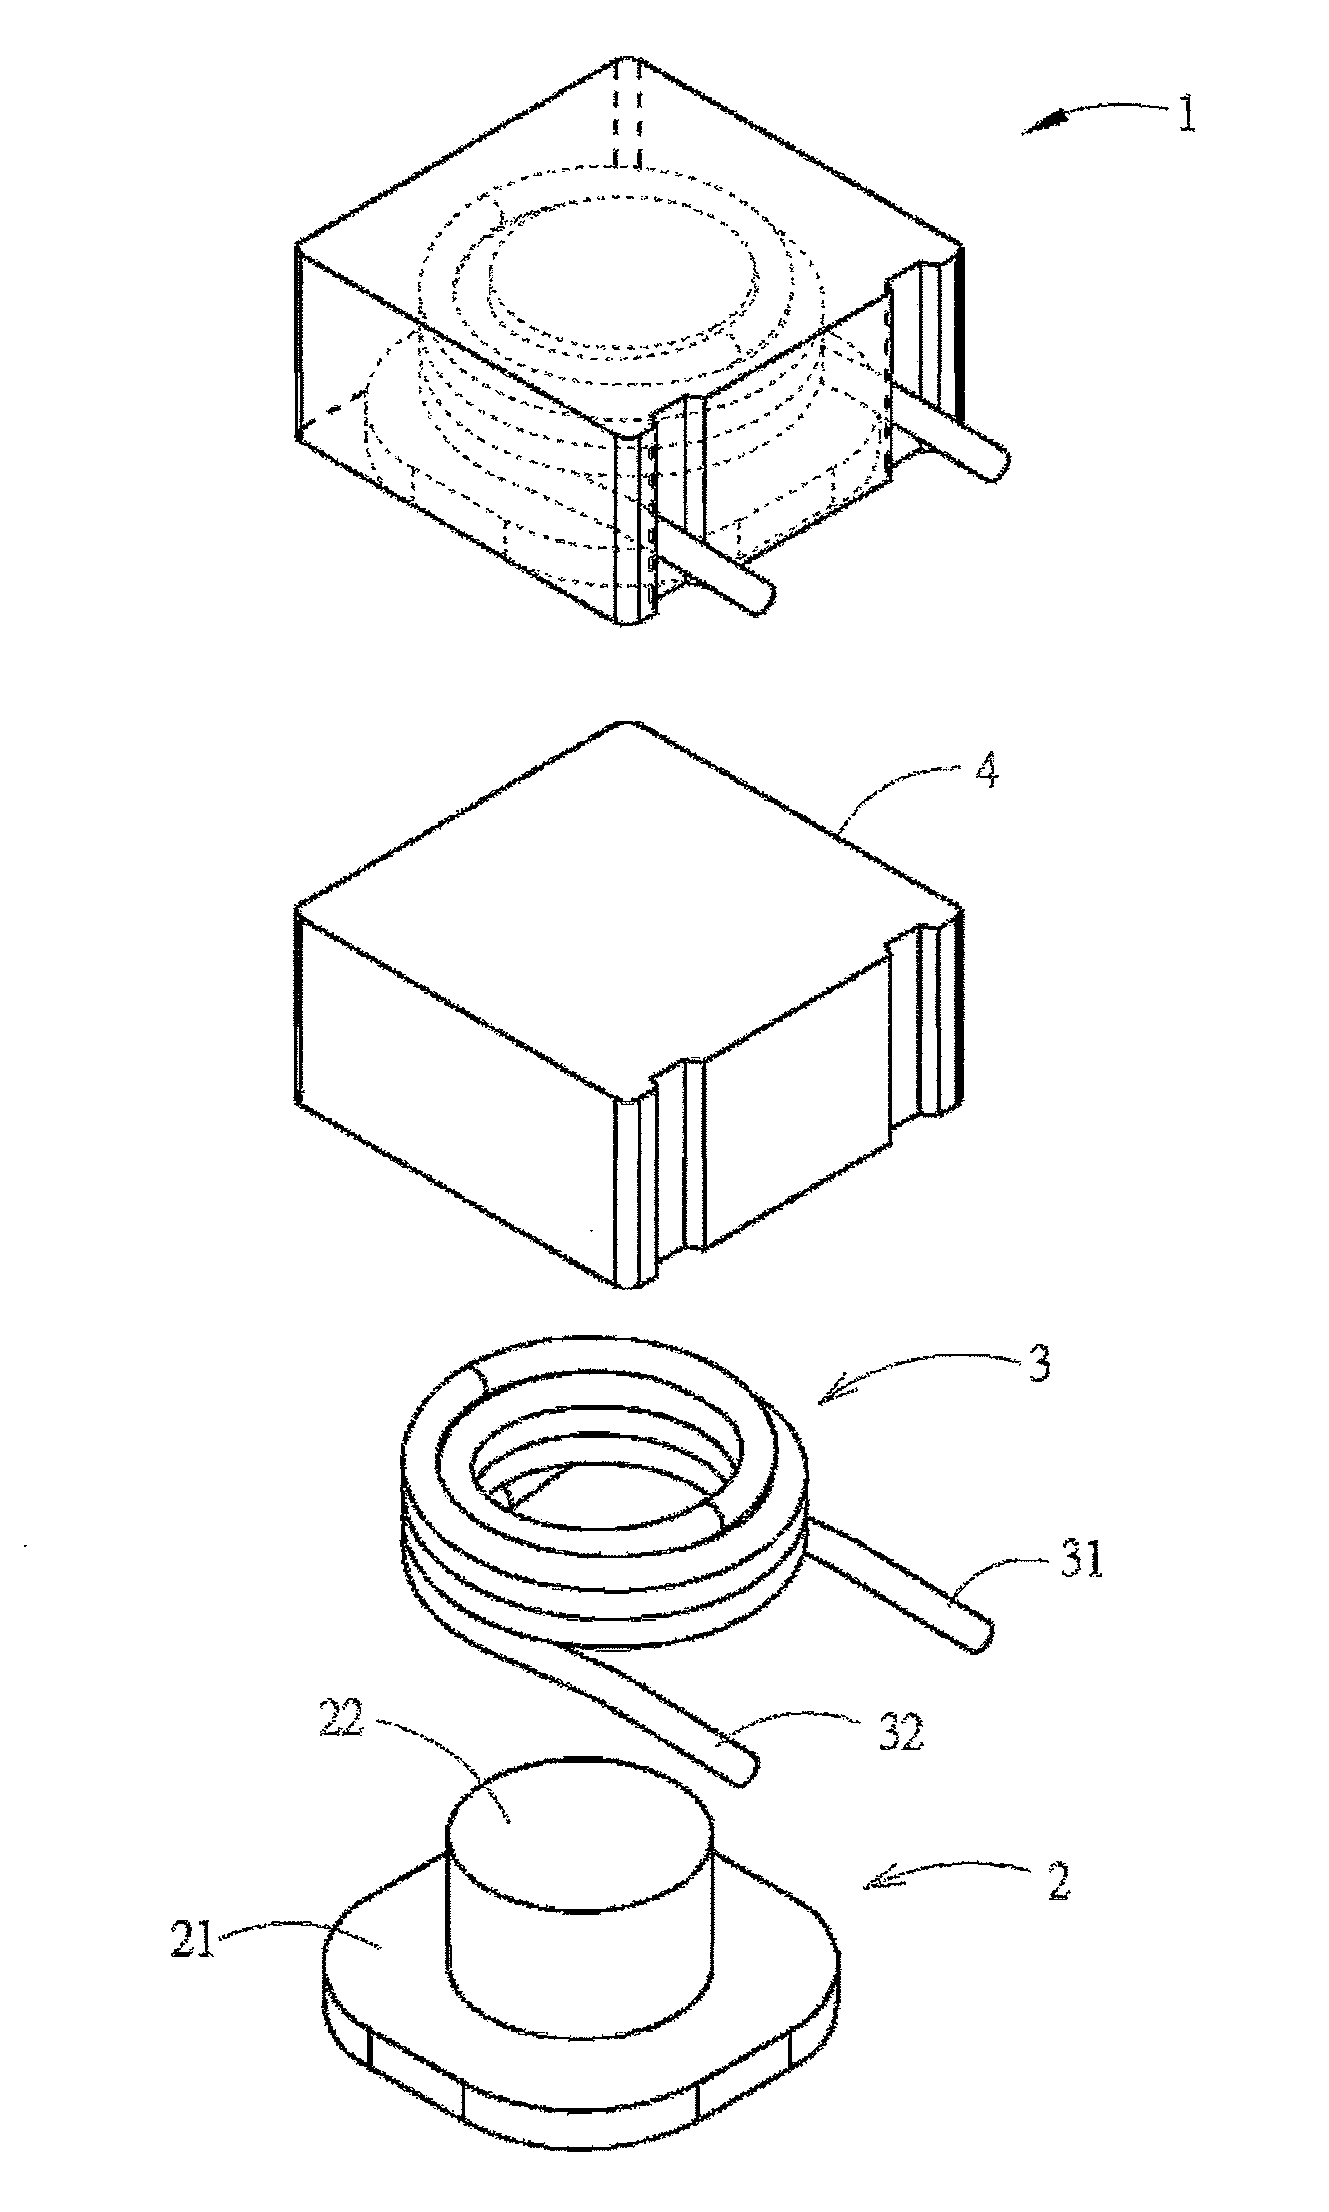 Magnetic device with high saturation current and low core loss